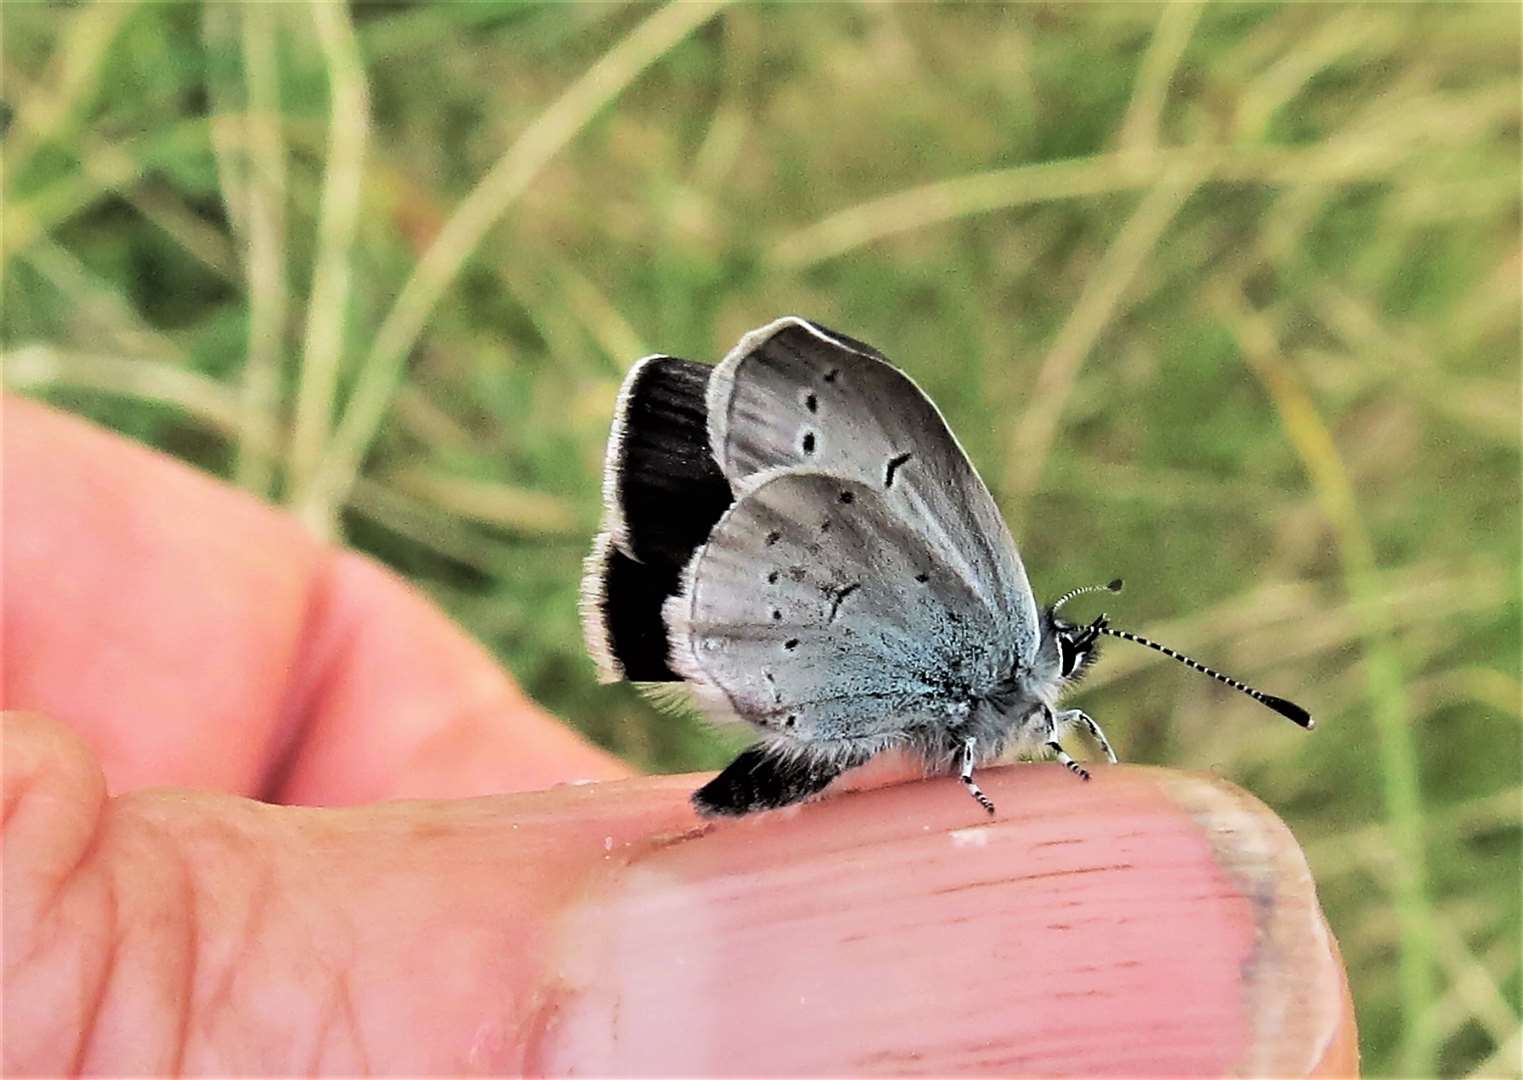 Small blue drying its wings.